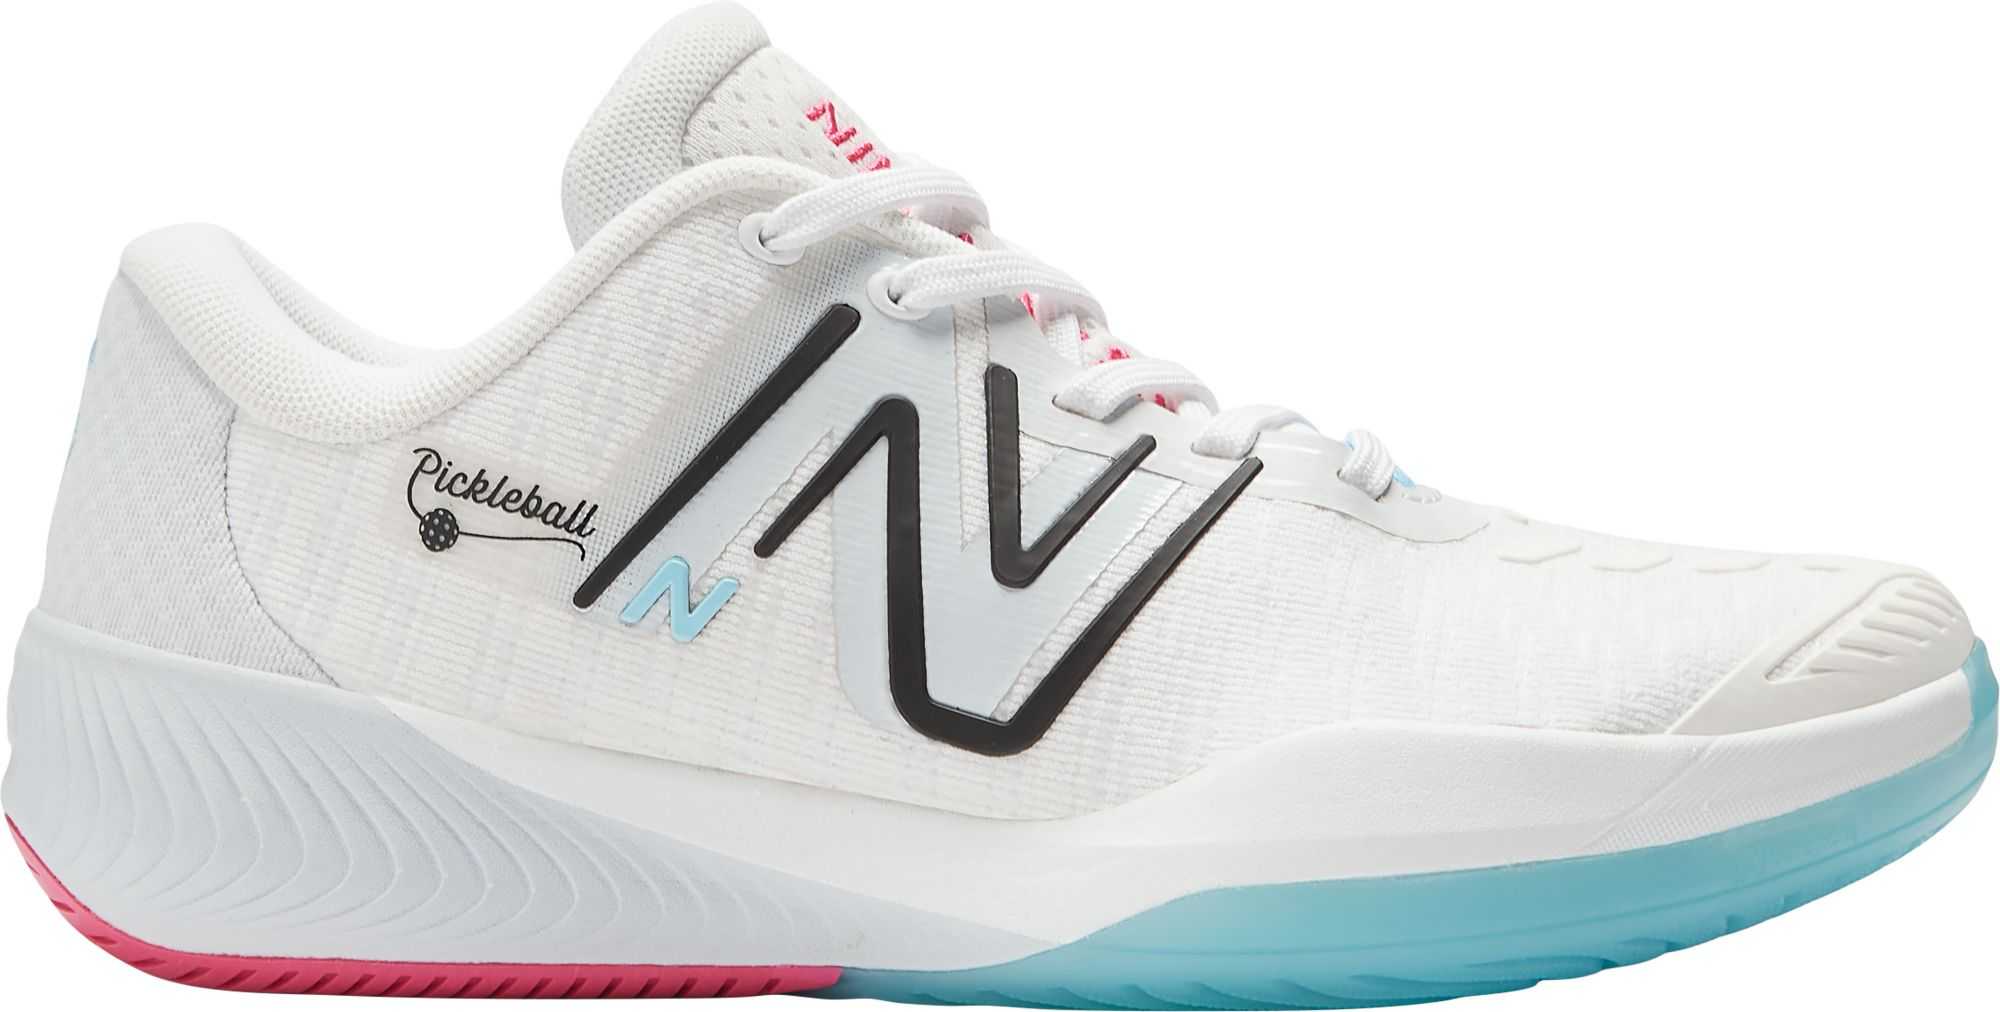 New Balance Women's Fuel Cell 996V5 Pickleball Shoes, Size 6.5, White